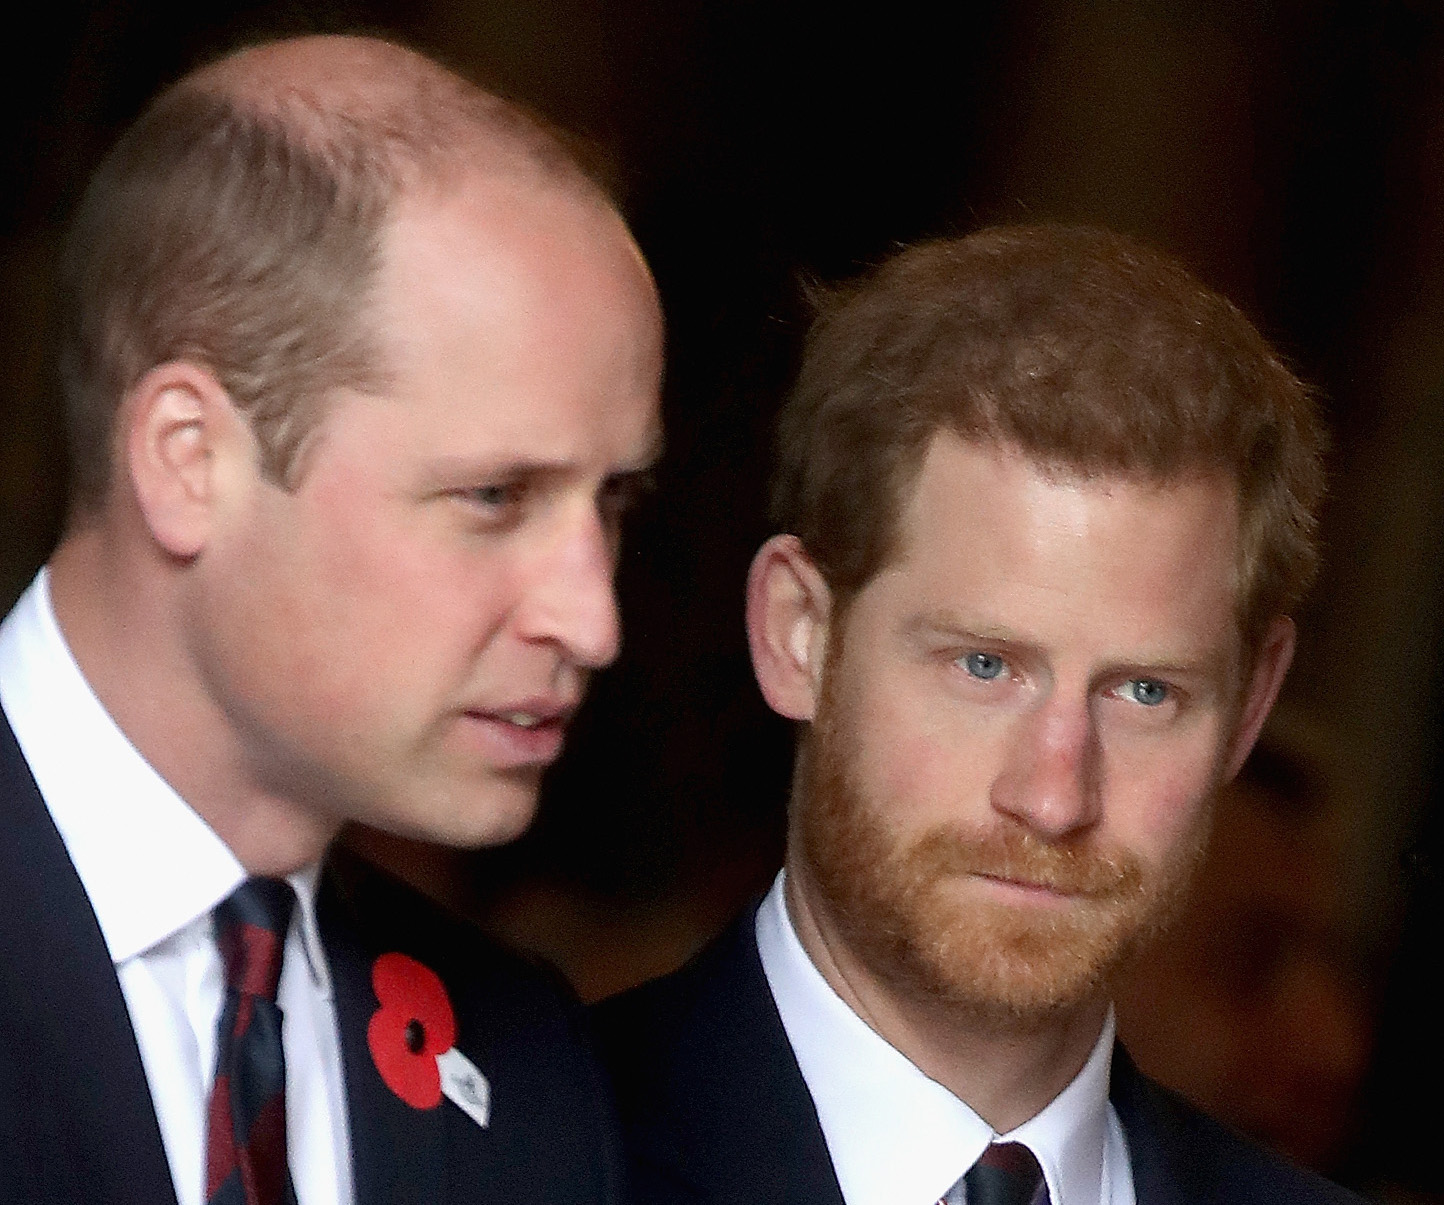 Inside Prince Harry and Prince William’s heartbreaking royal feud